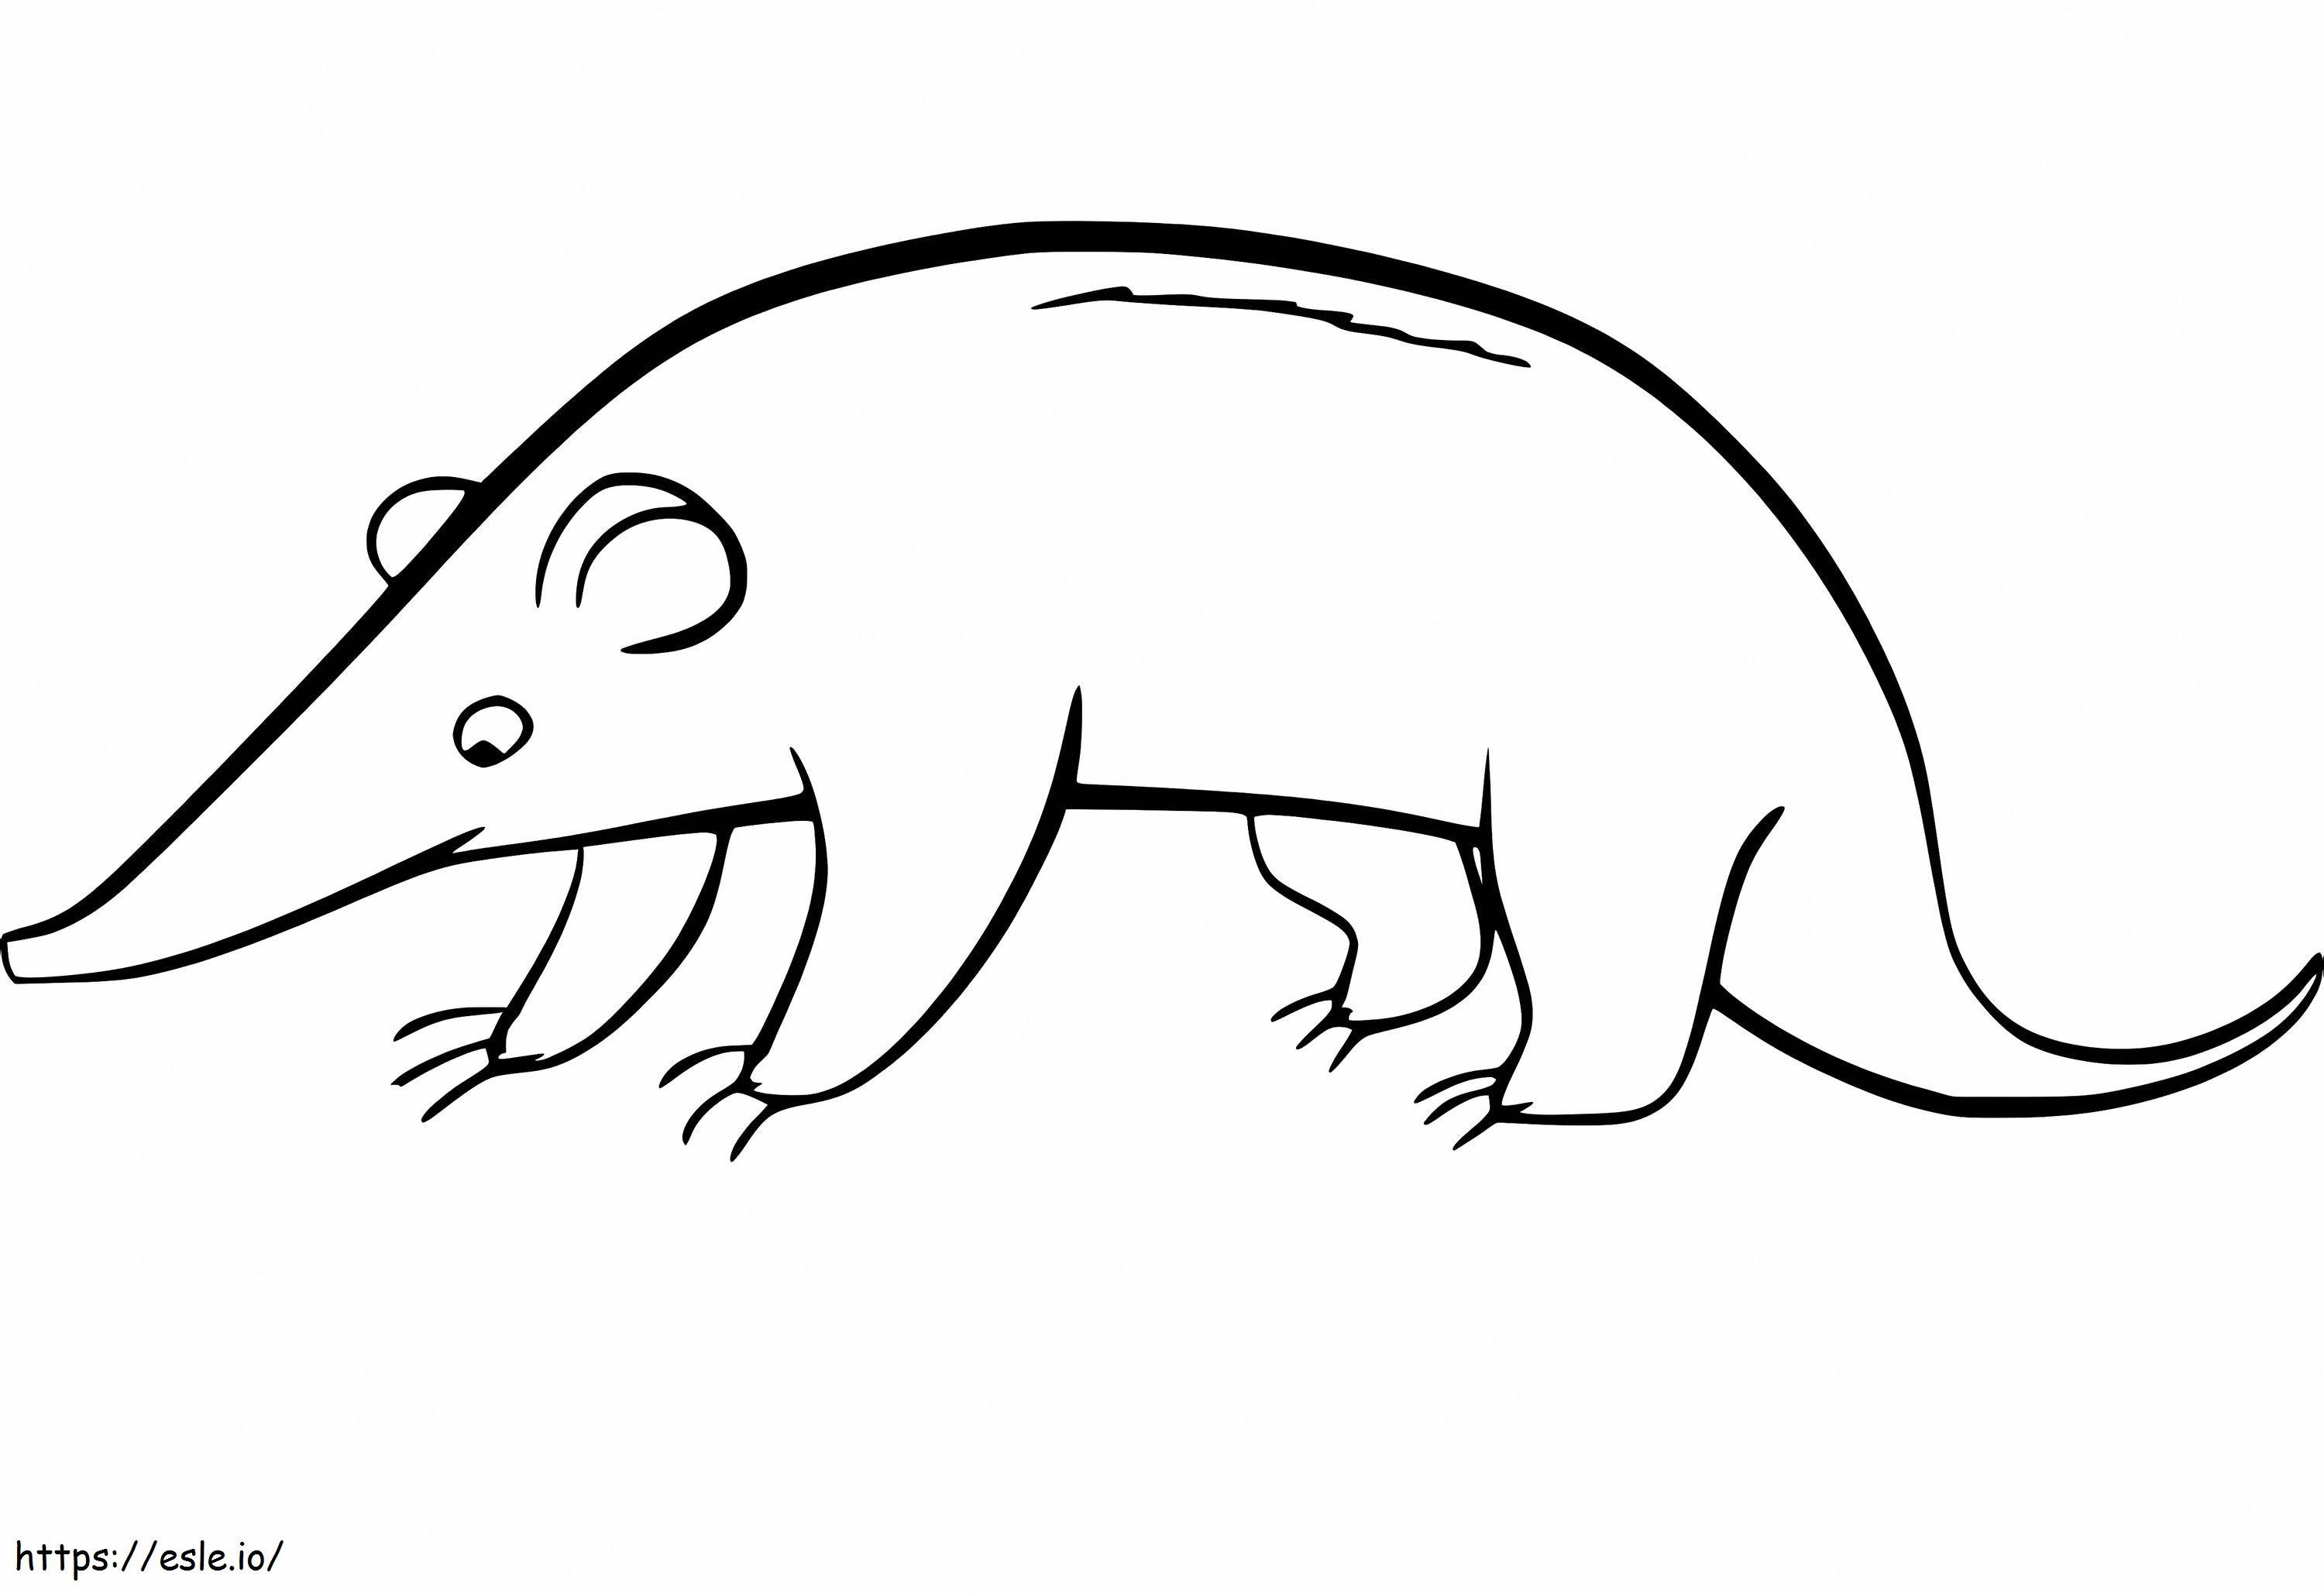 Little Shrew coloring page